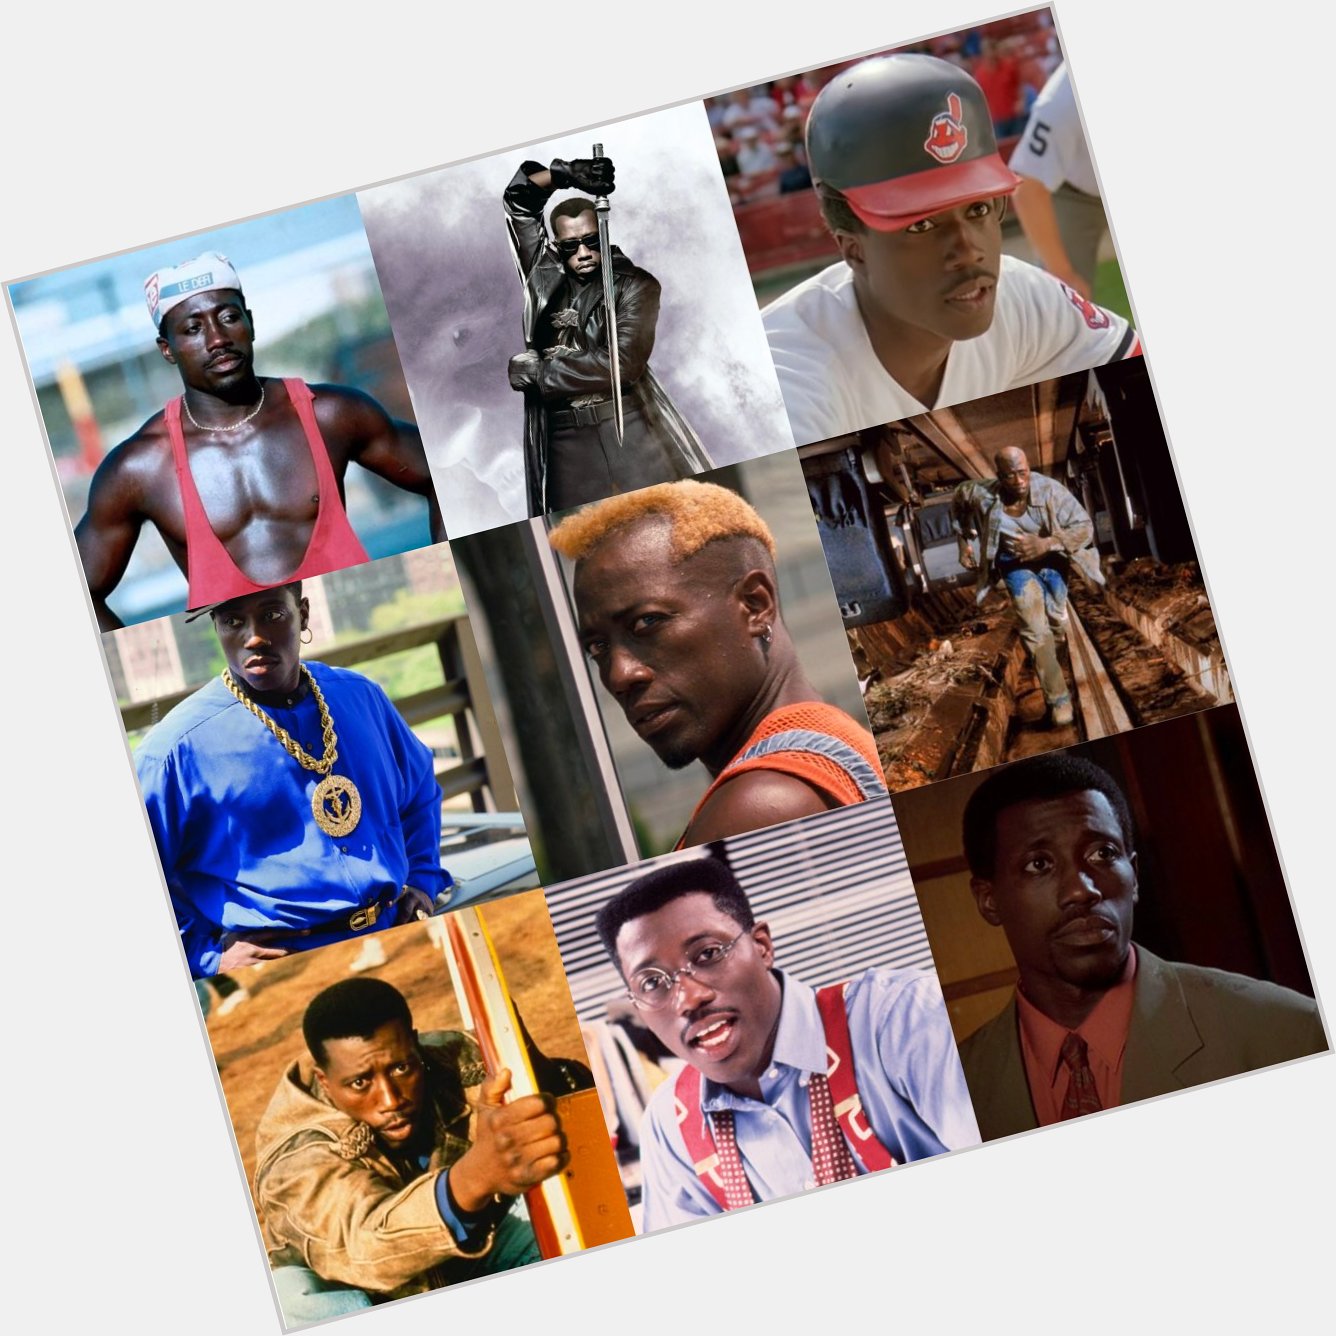 Happy 60th birthday to Wesley Snipes! Pay homage and reply with your favorite Snipes flick. 